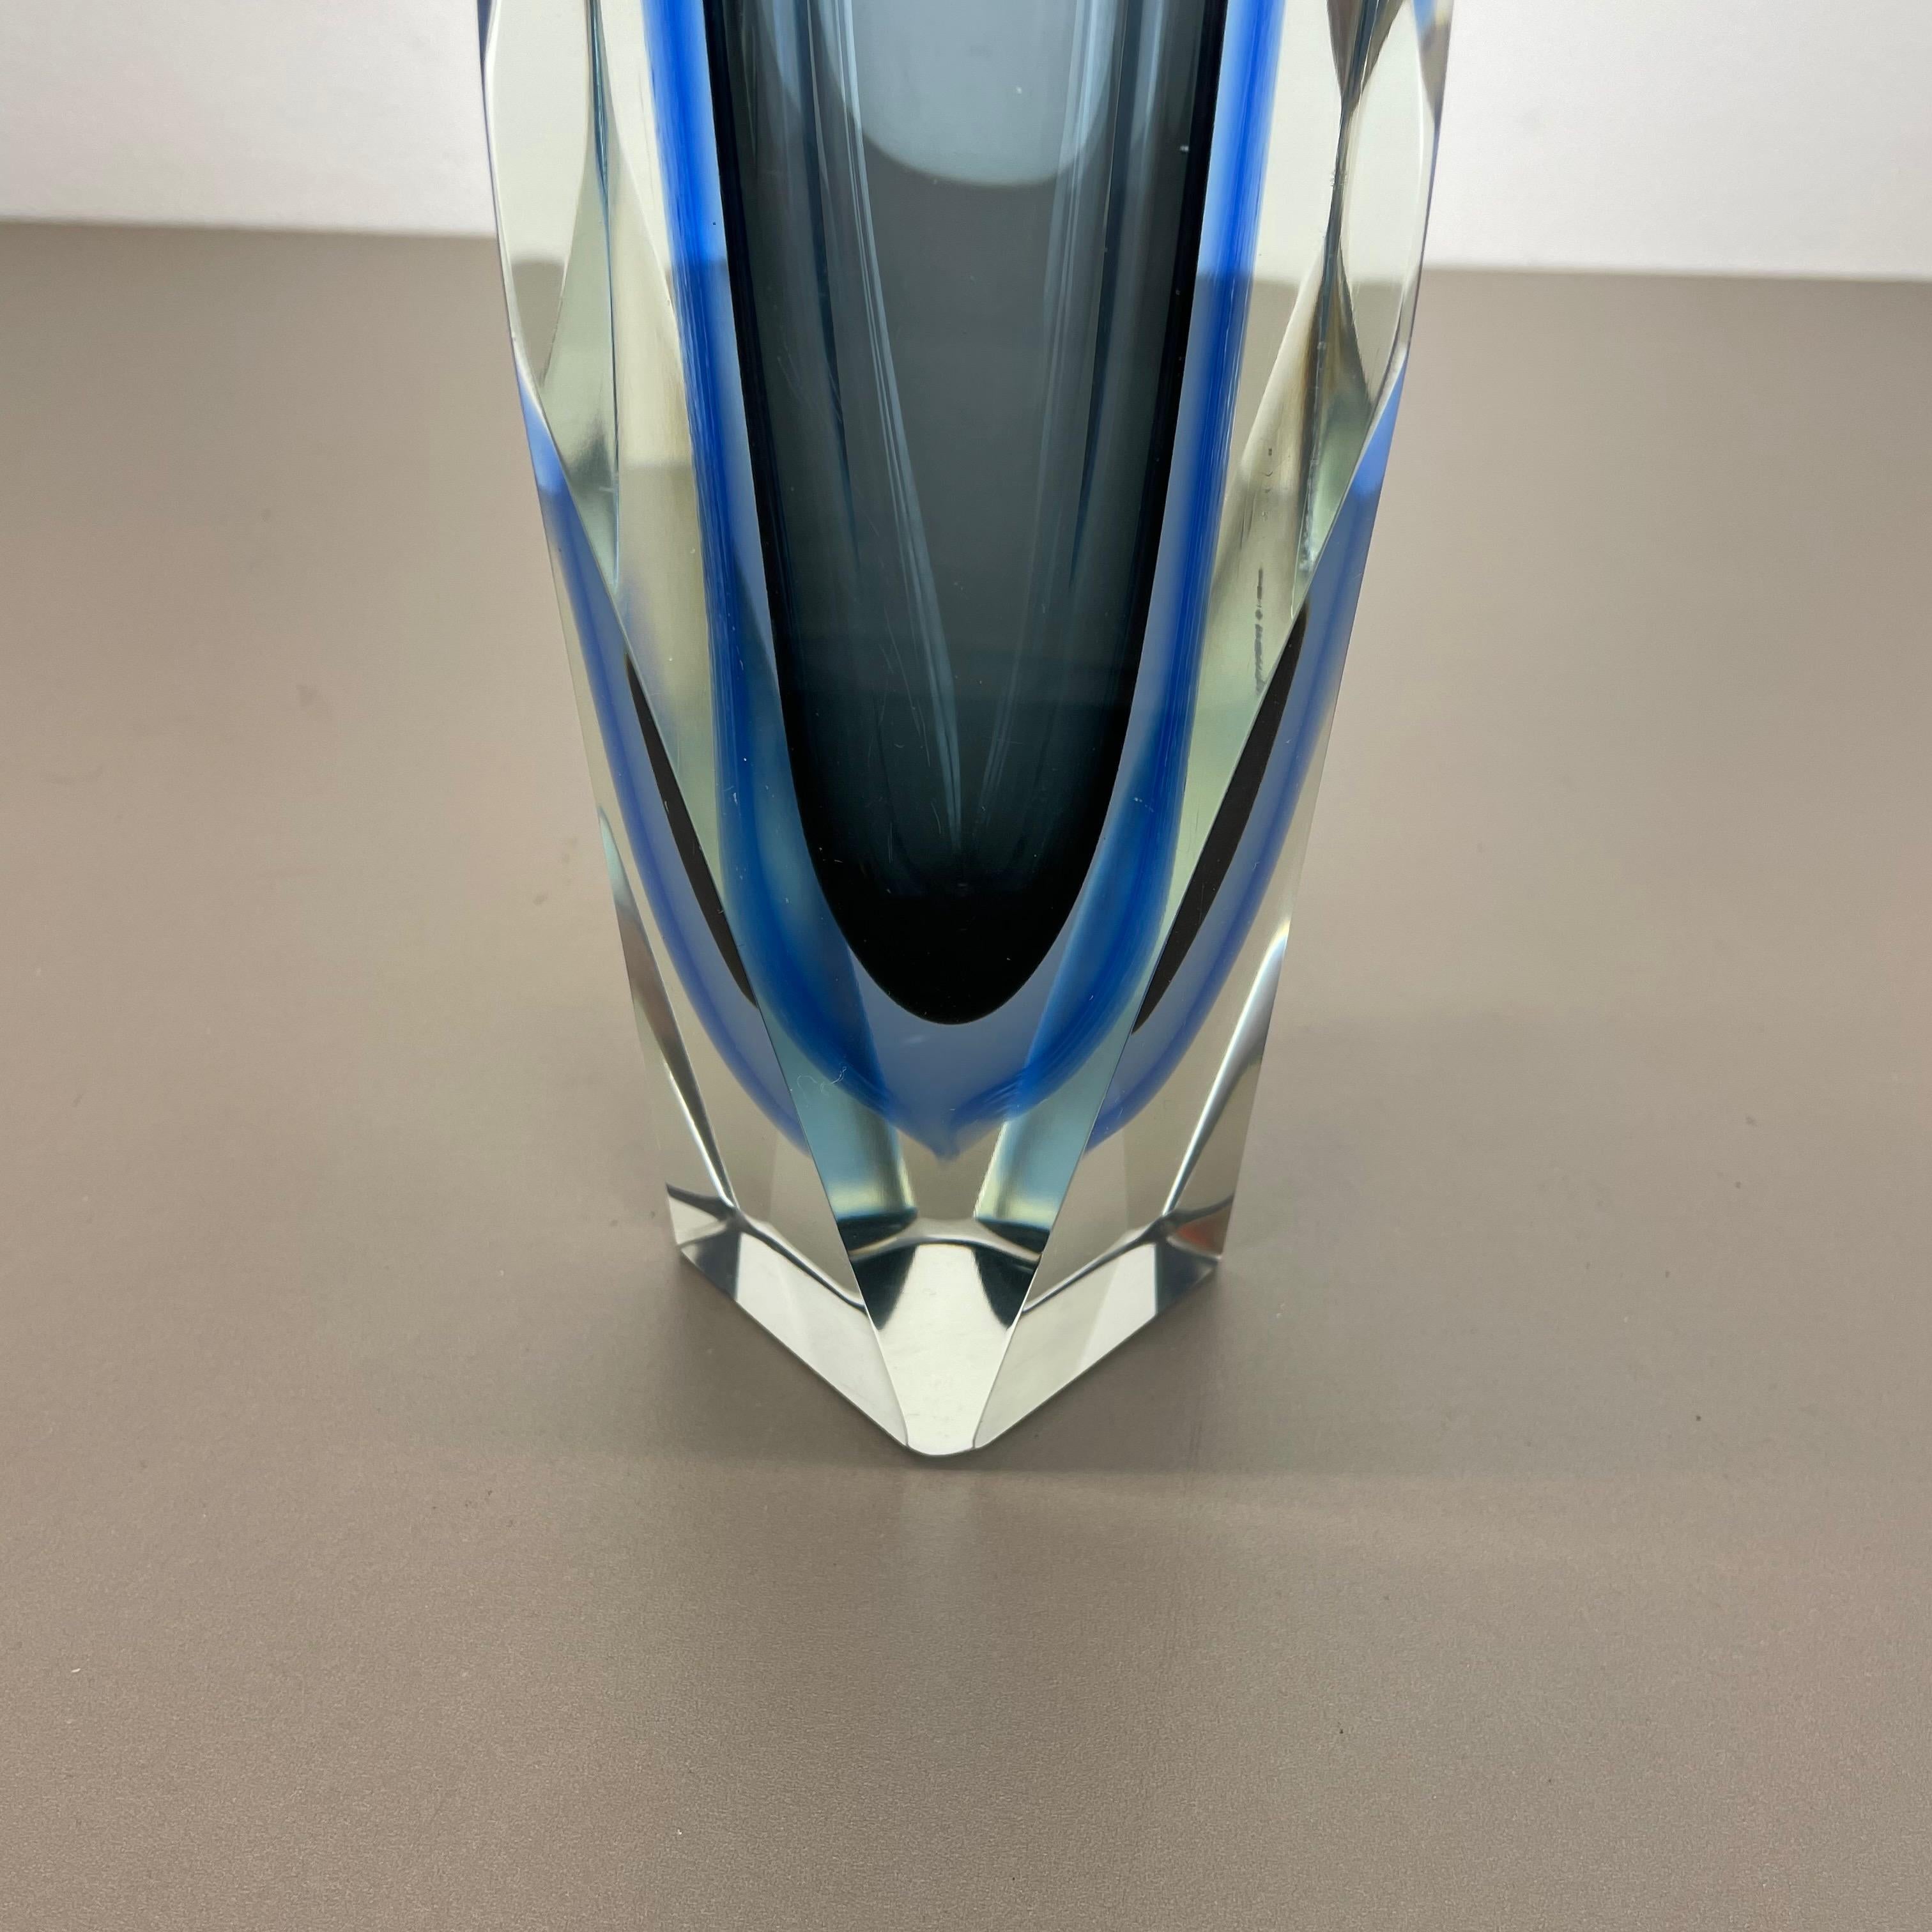 Large Blue Mandruzzato Faceted Glass Sommerso Vase, Murano, Italy 1970s 1